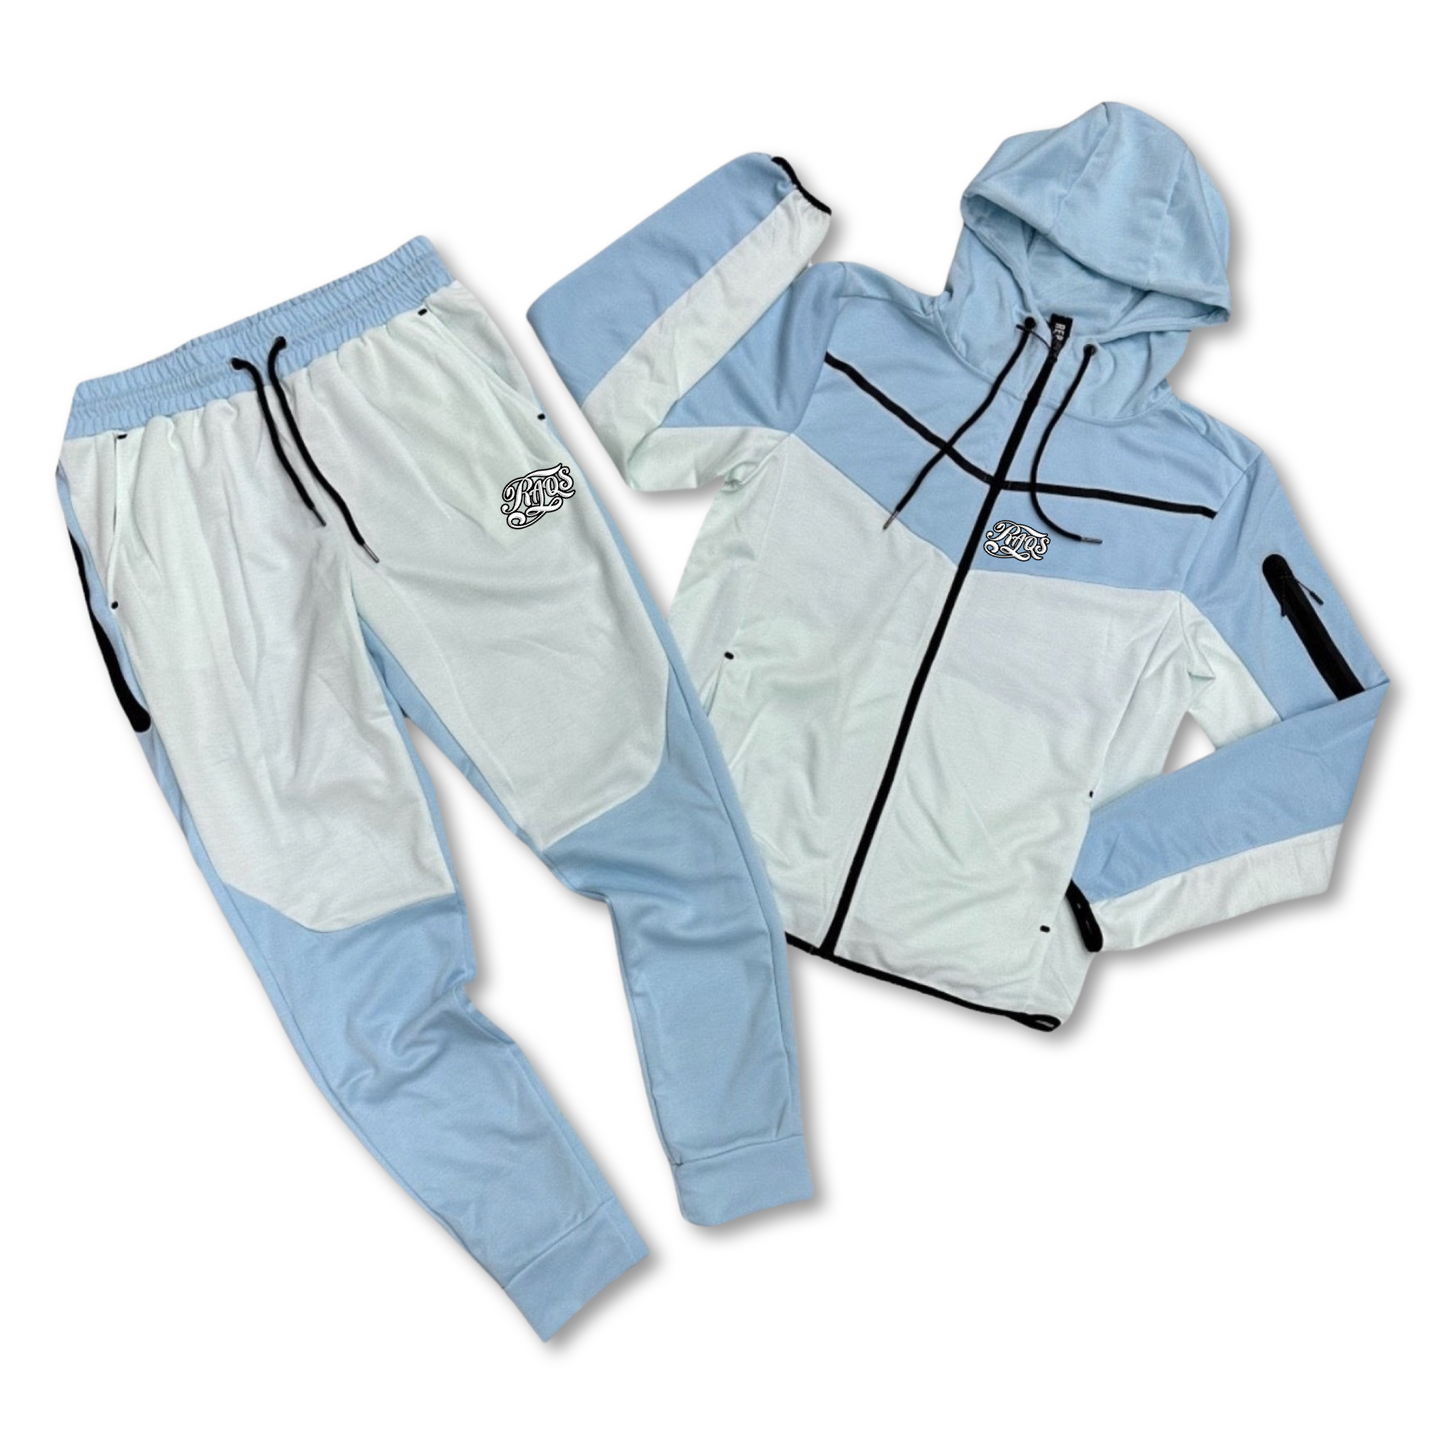 RaqsGear tech suit powder blue and white